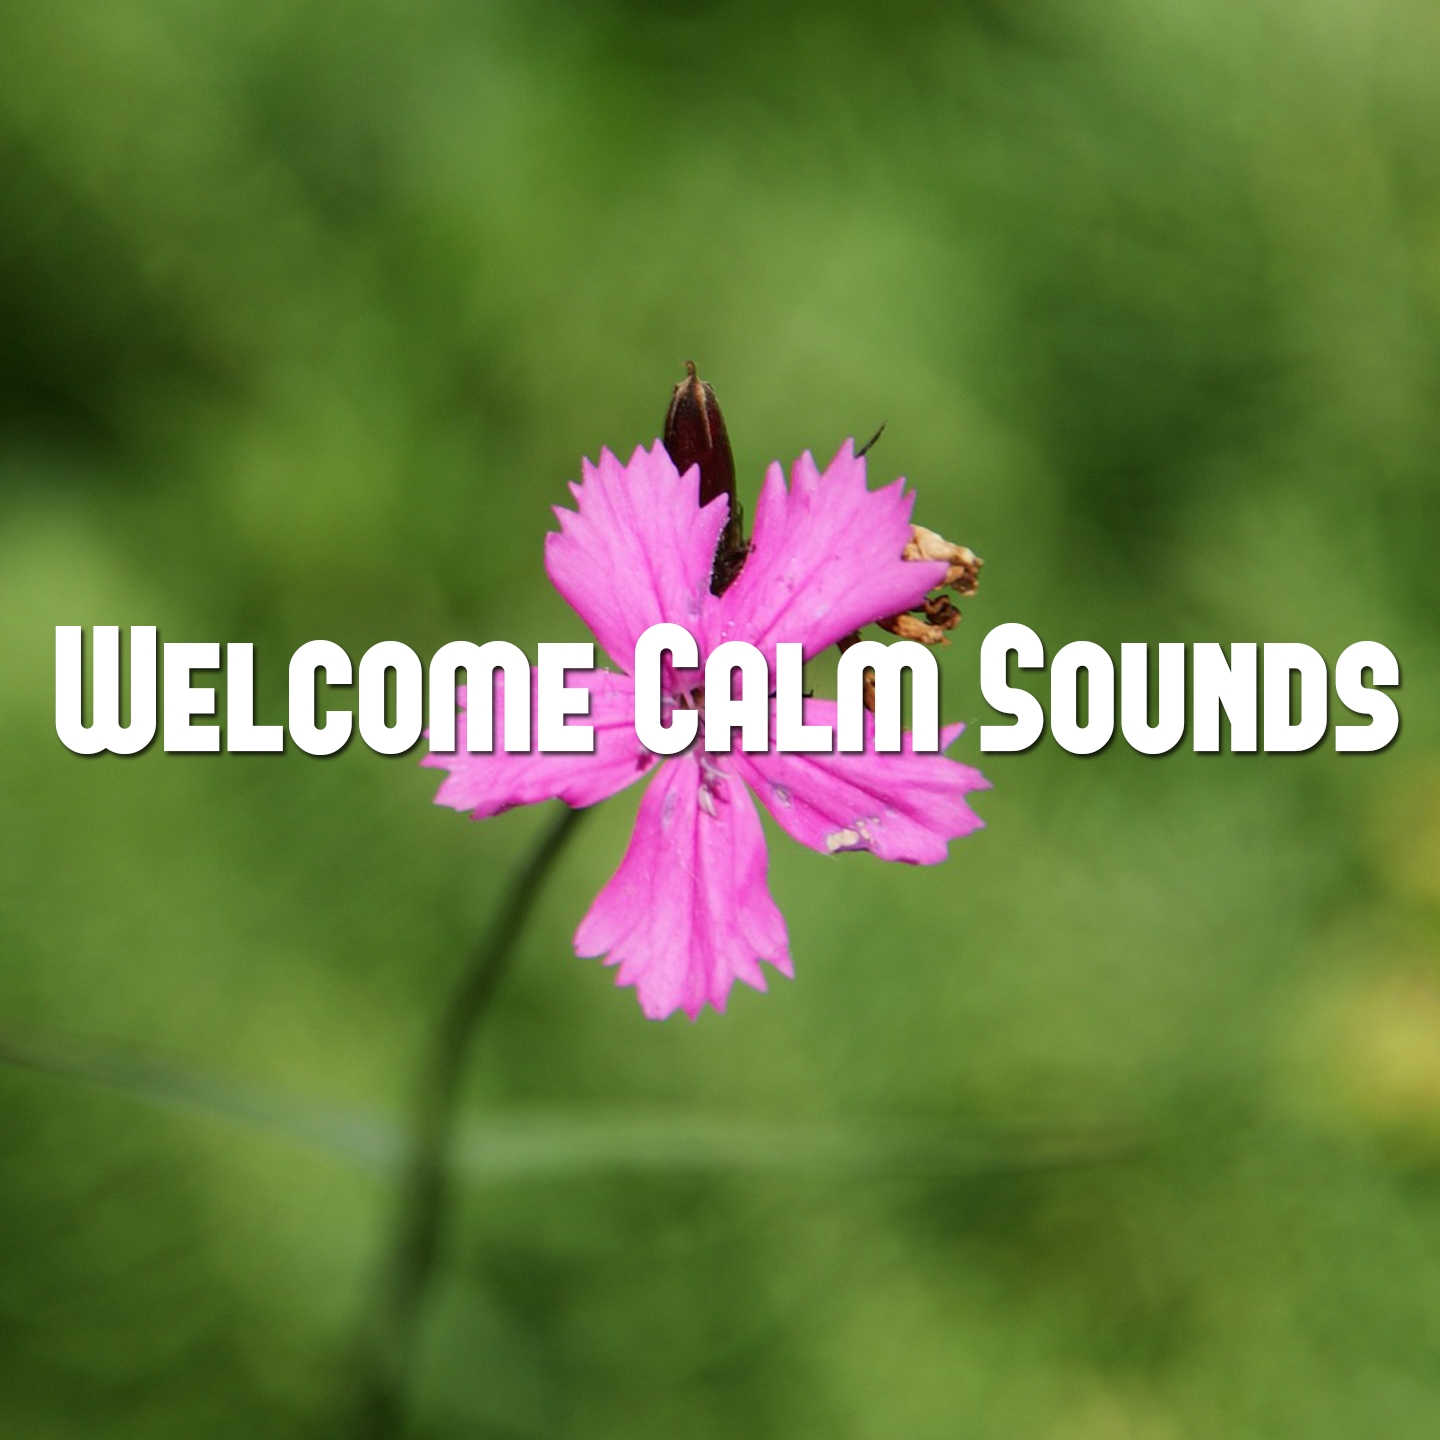 Welcome Calm Sounds